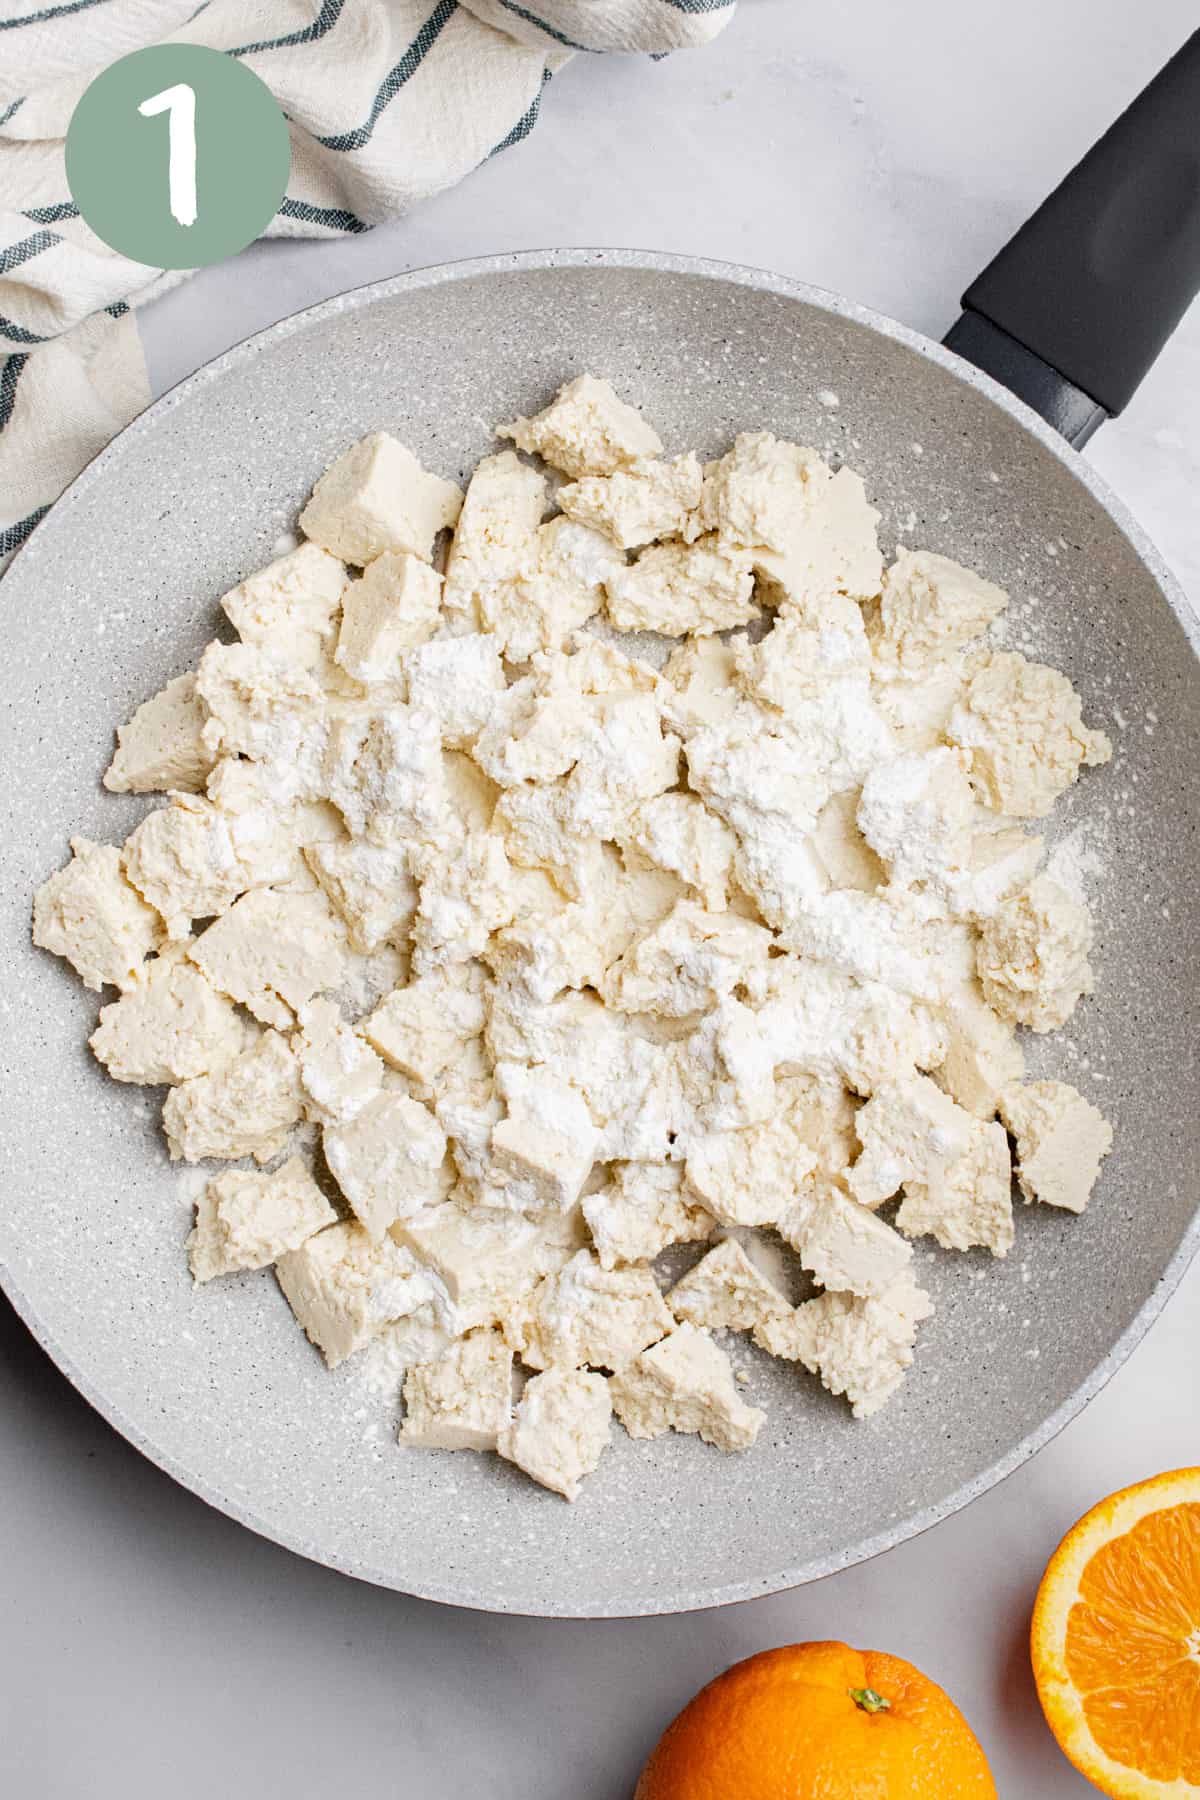 A frying pan with pieces of uncooked tofu sprinkled with cornstarch.